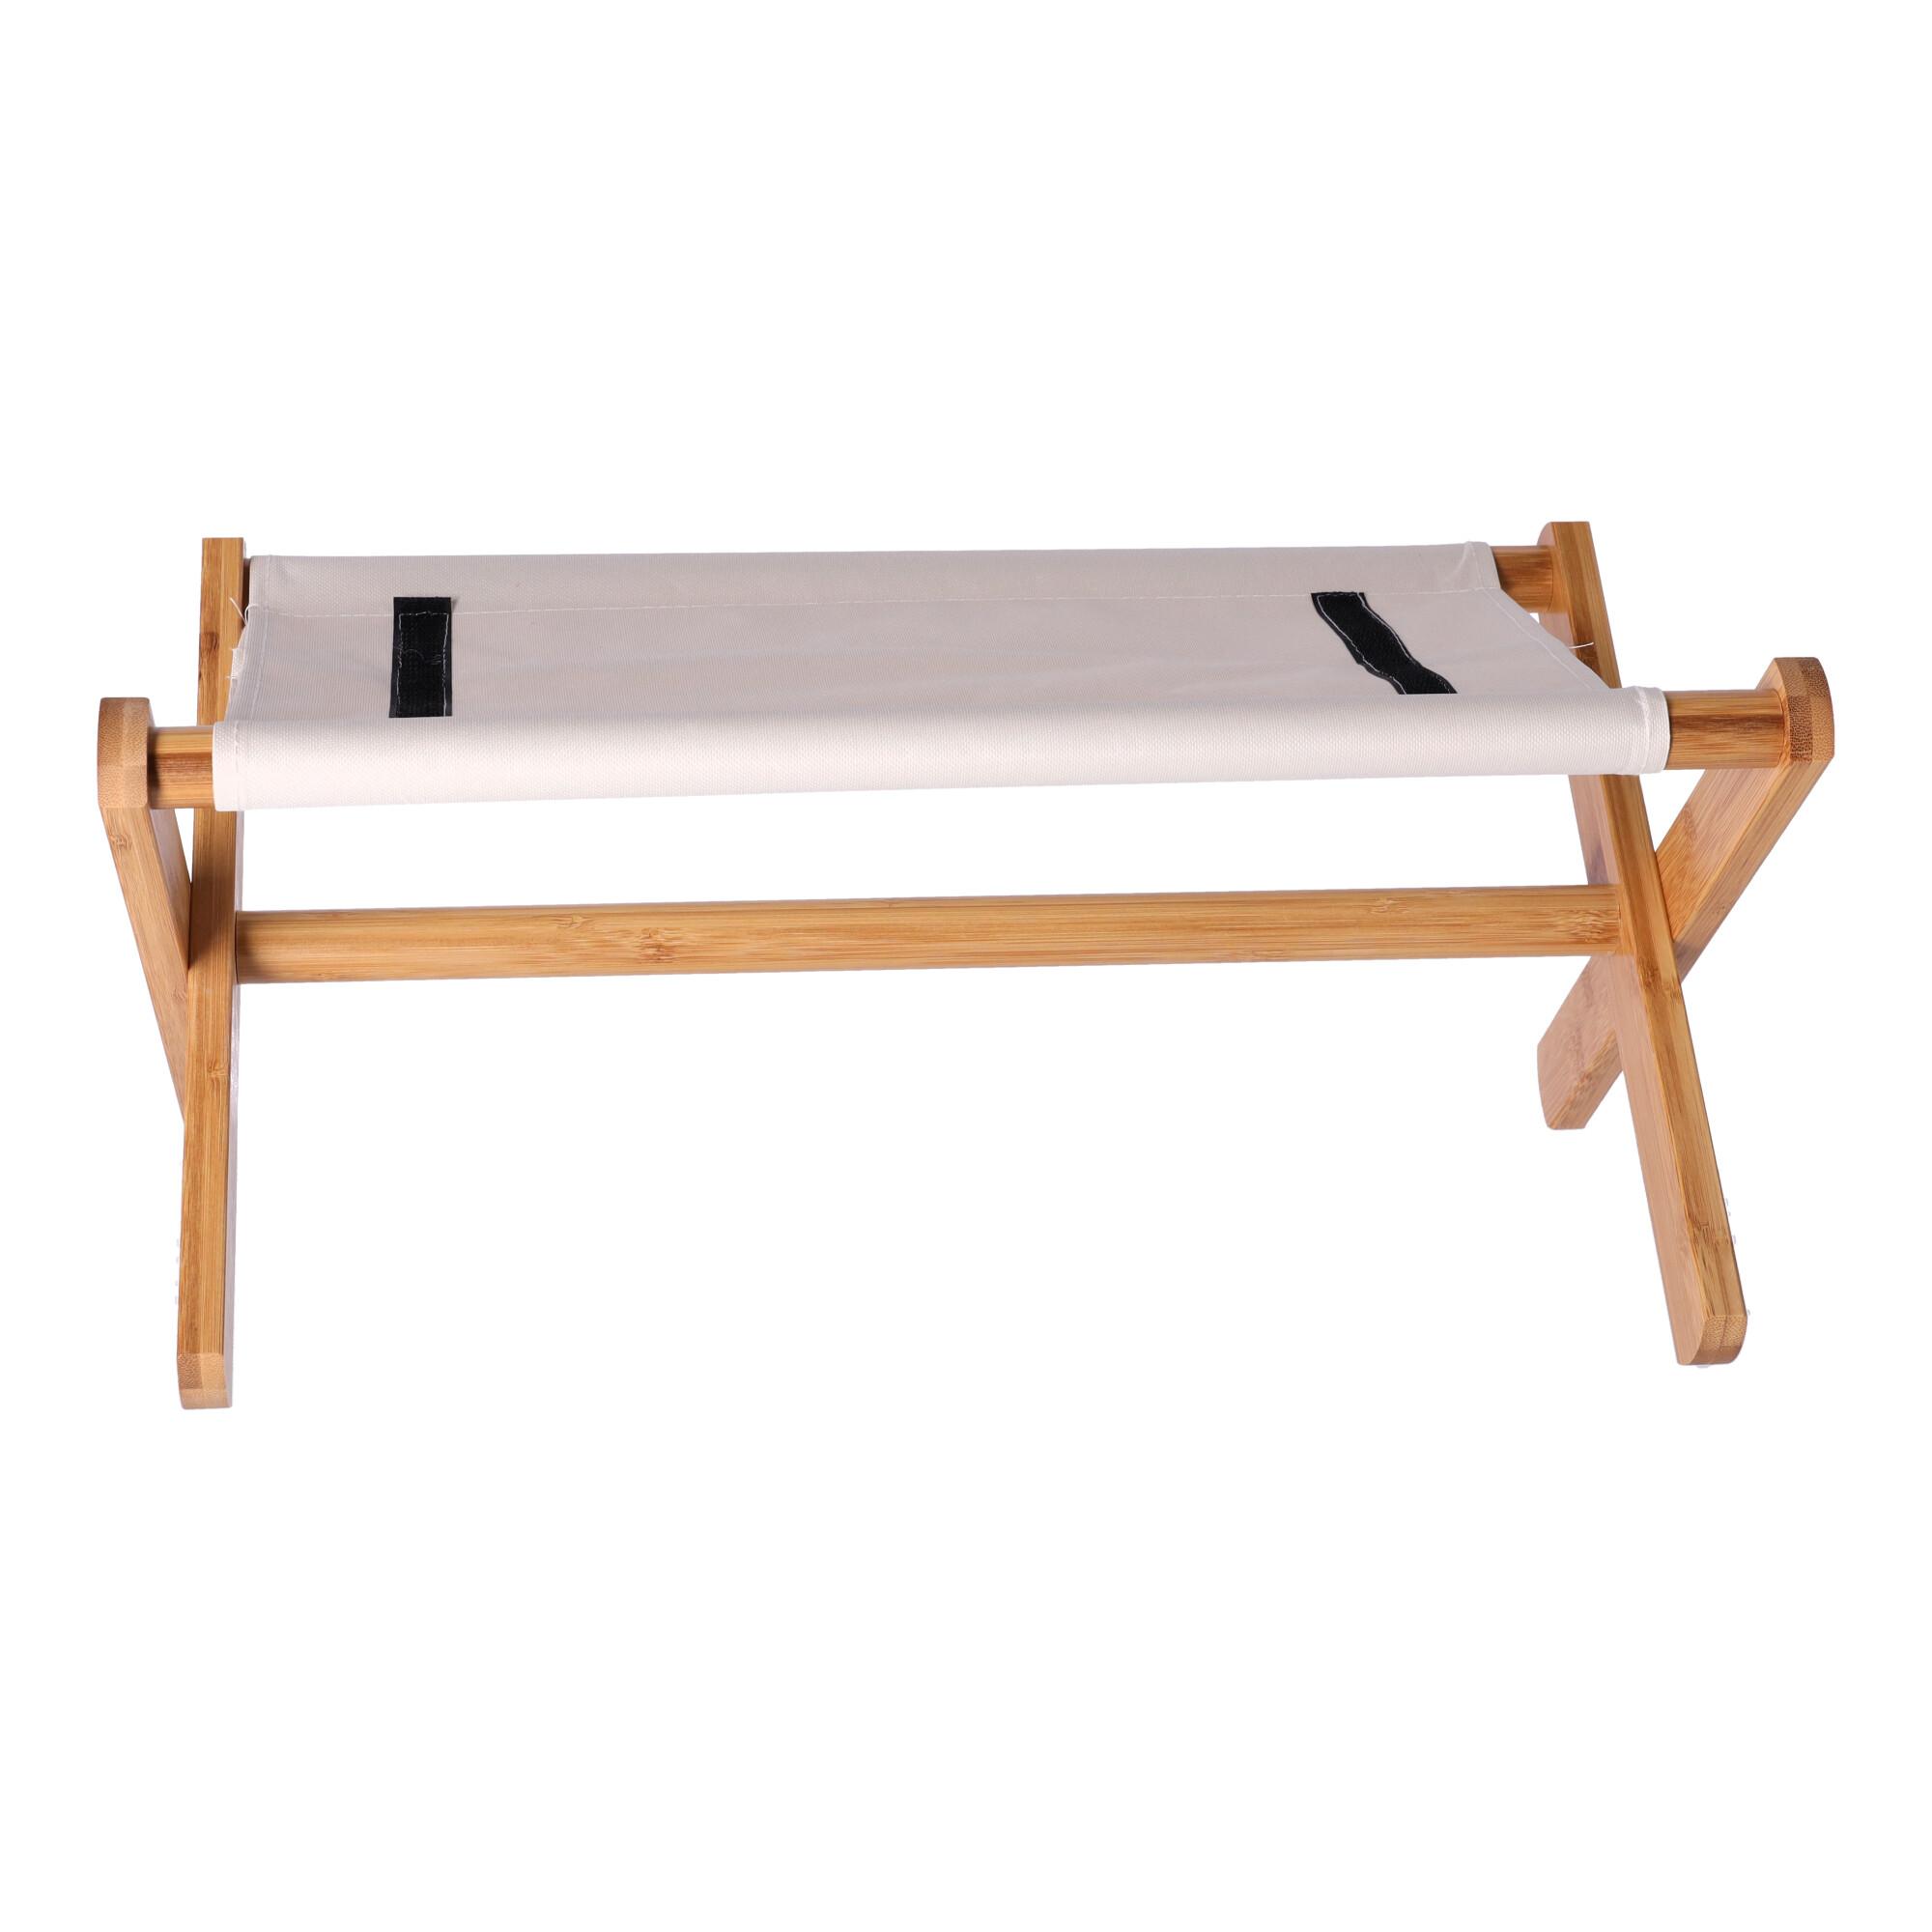 Bench, pouffe with a seat - light brown, small